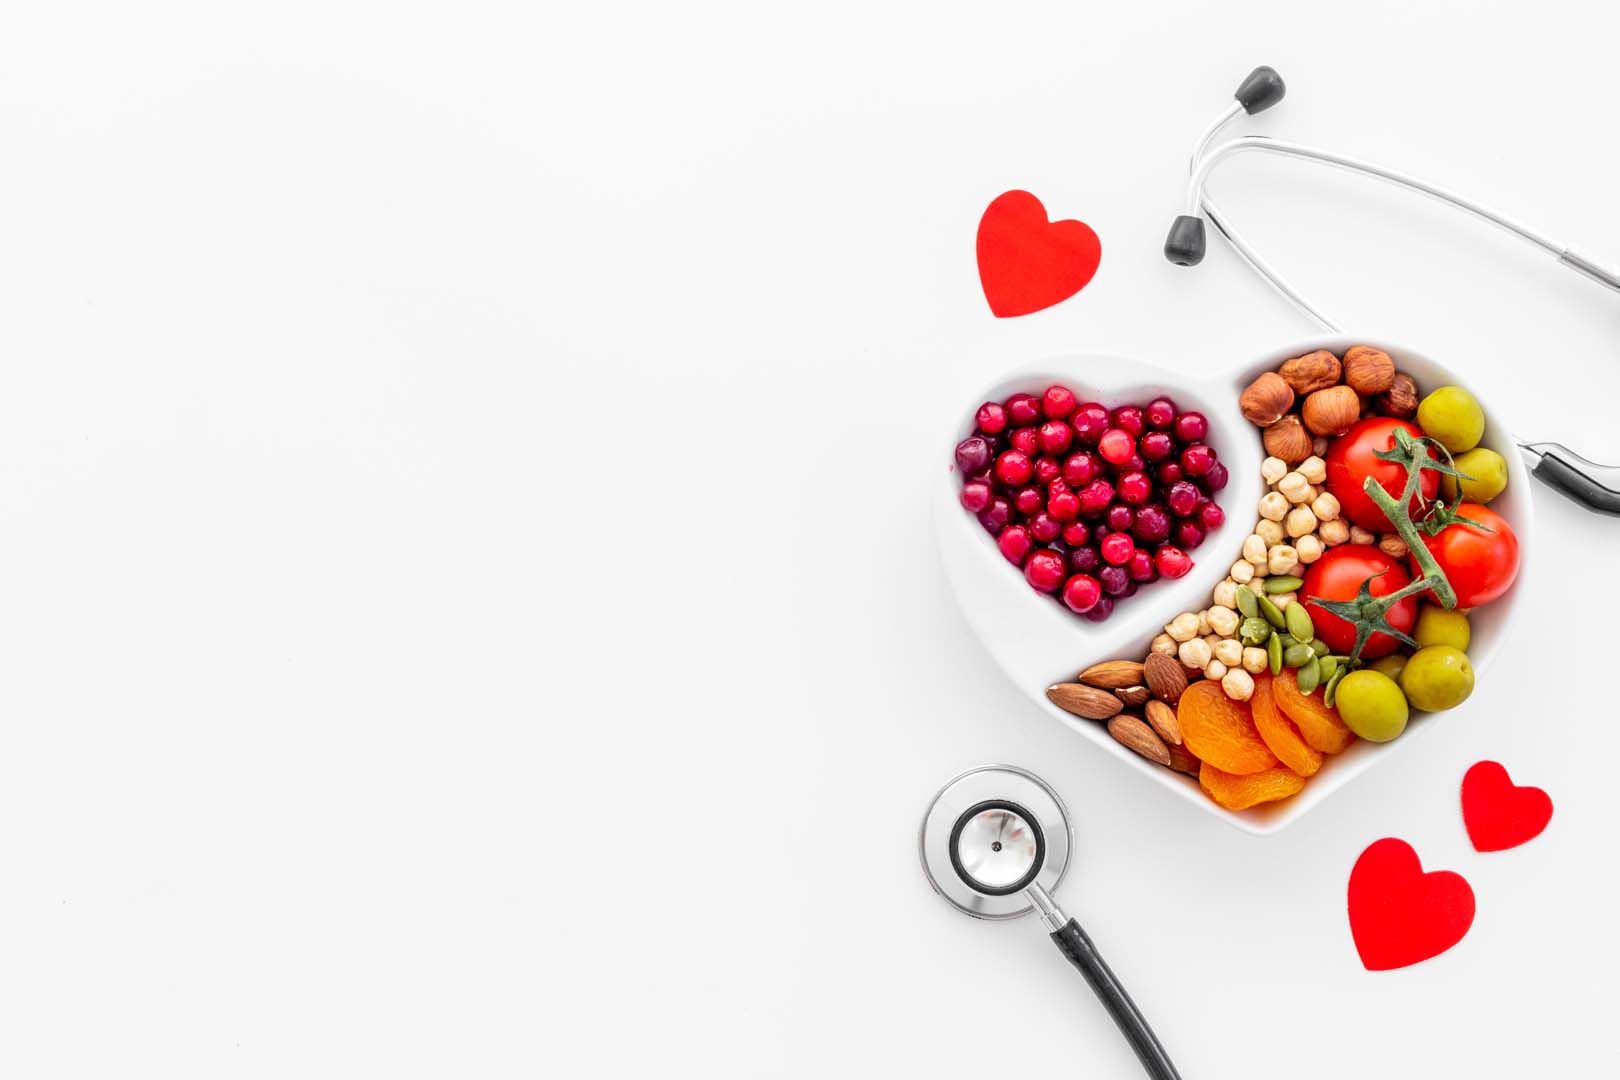 Cholesterol diet concept. Healthy food in heart shaped dish with stethoscope.